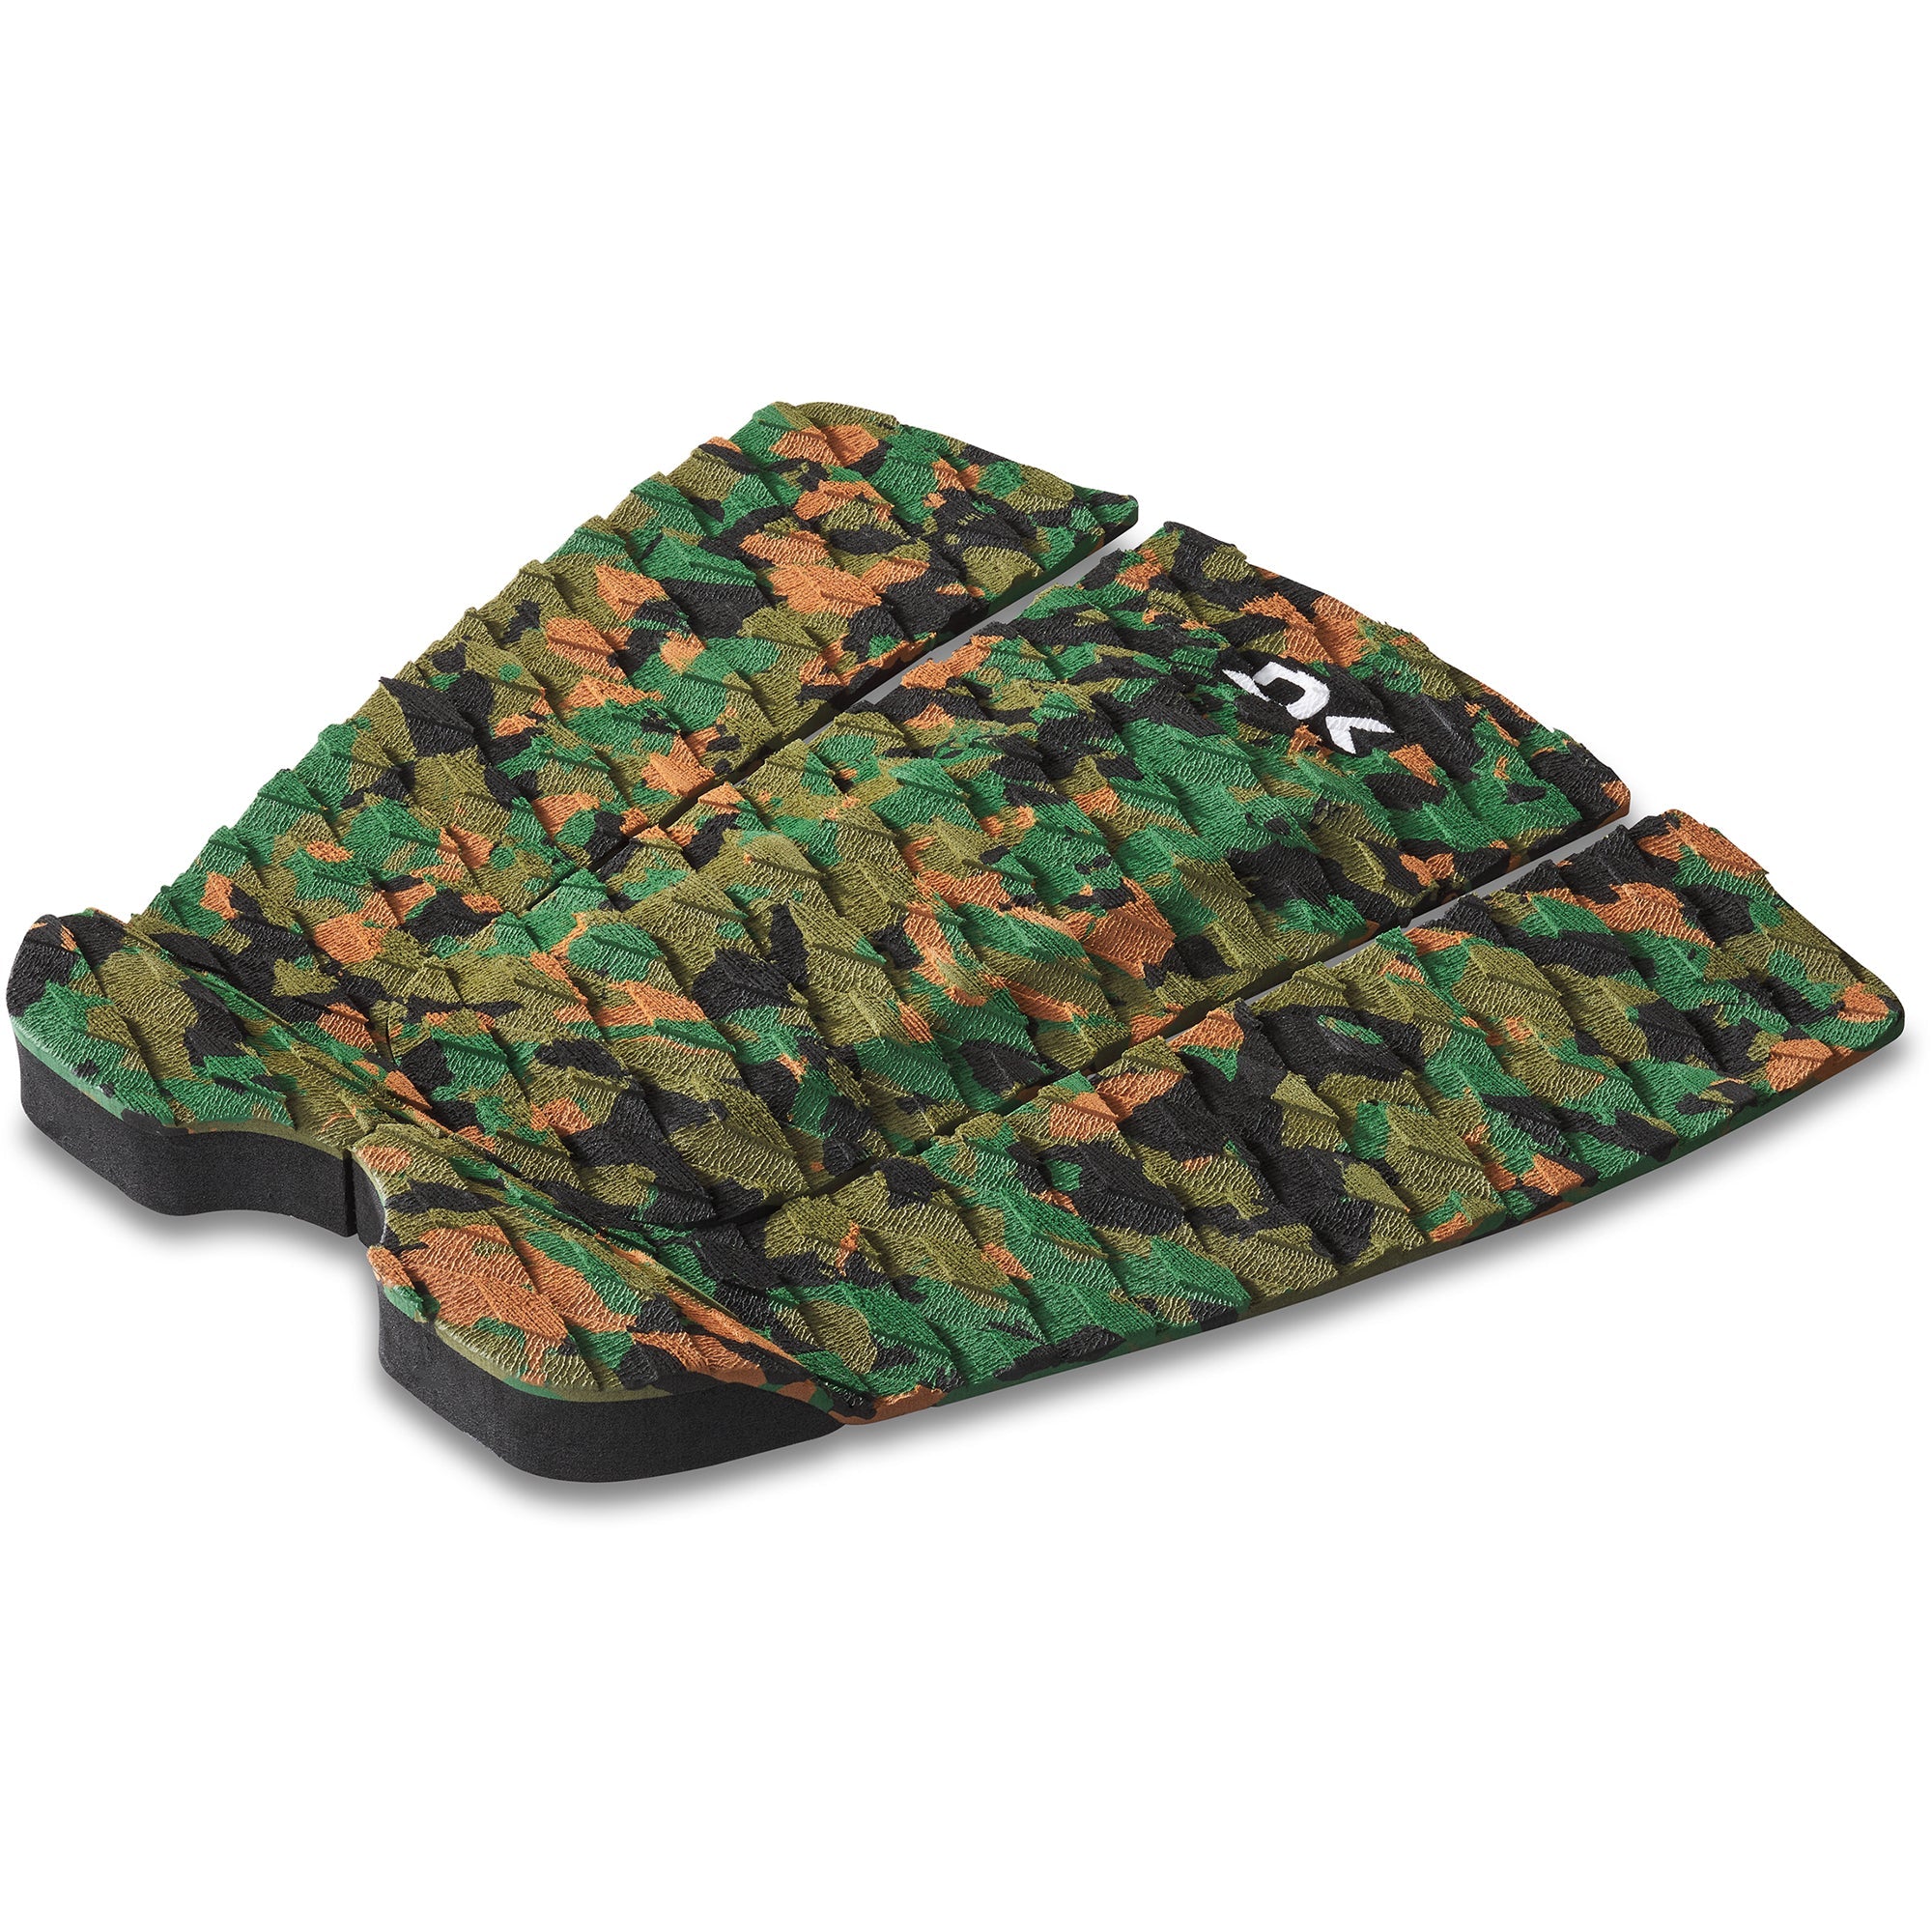 Dakine Andy Irons Pro Traction Pad 951-Olive Camo